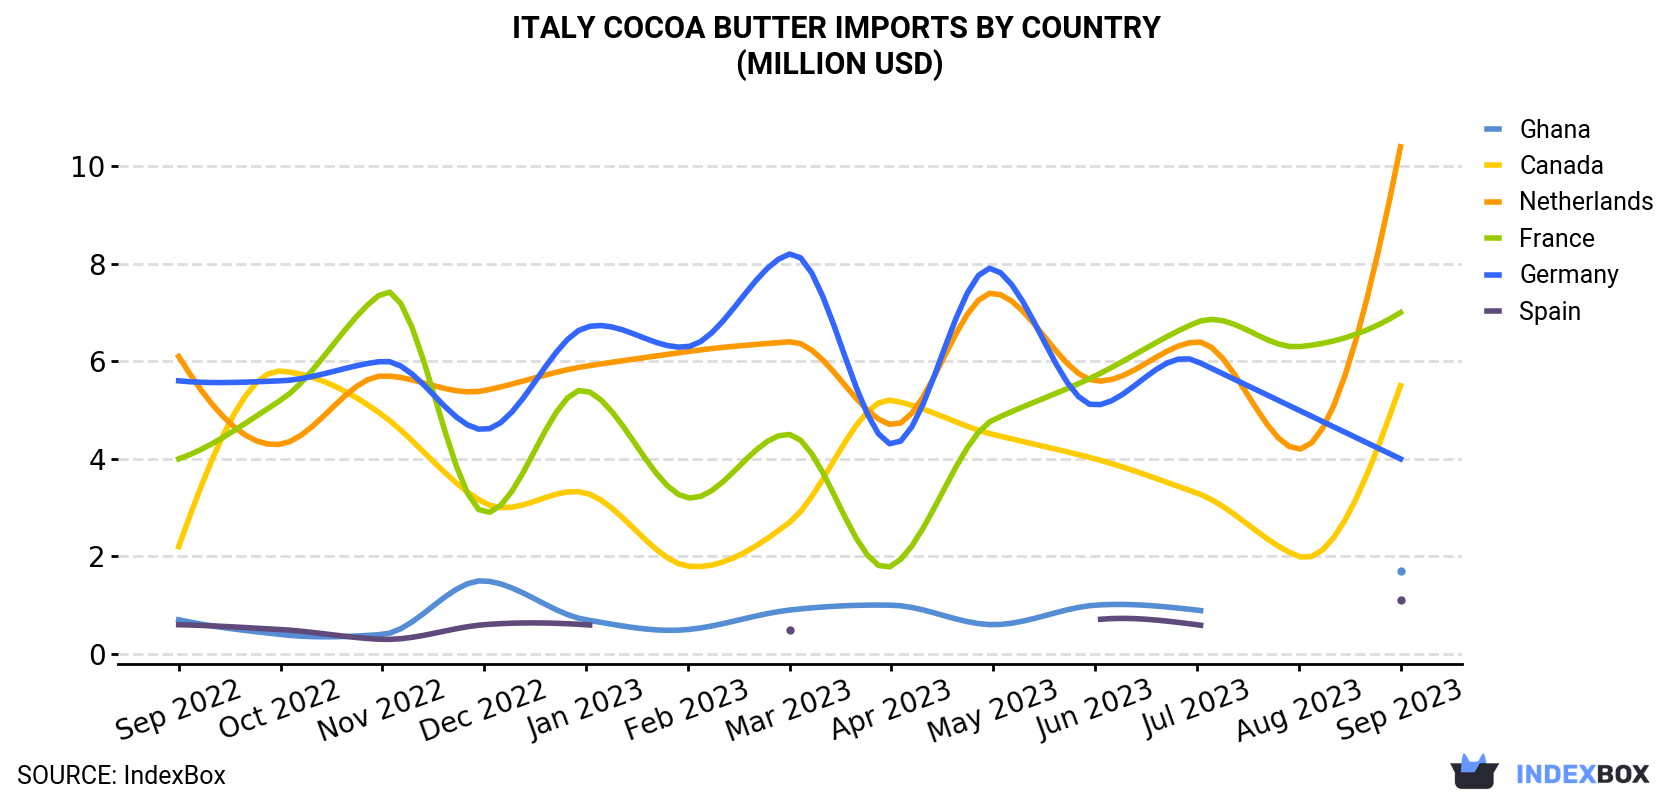 Italy Cocoa Butter Imports By Country (Million USD)